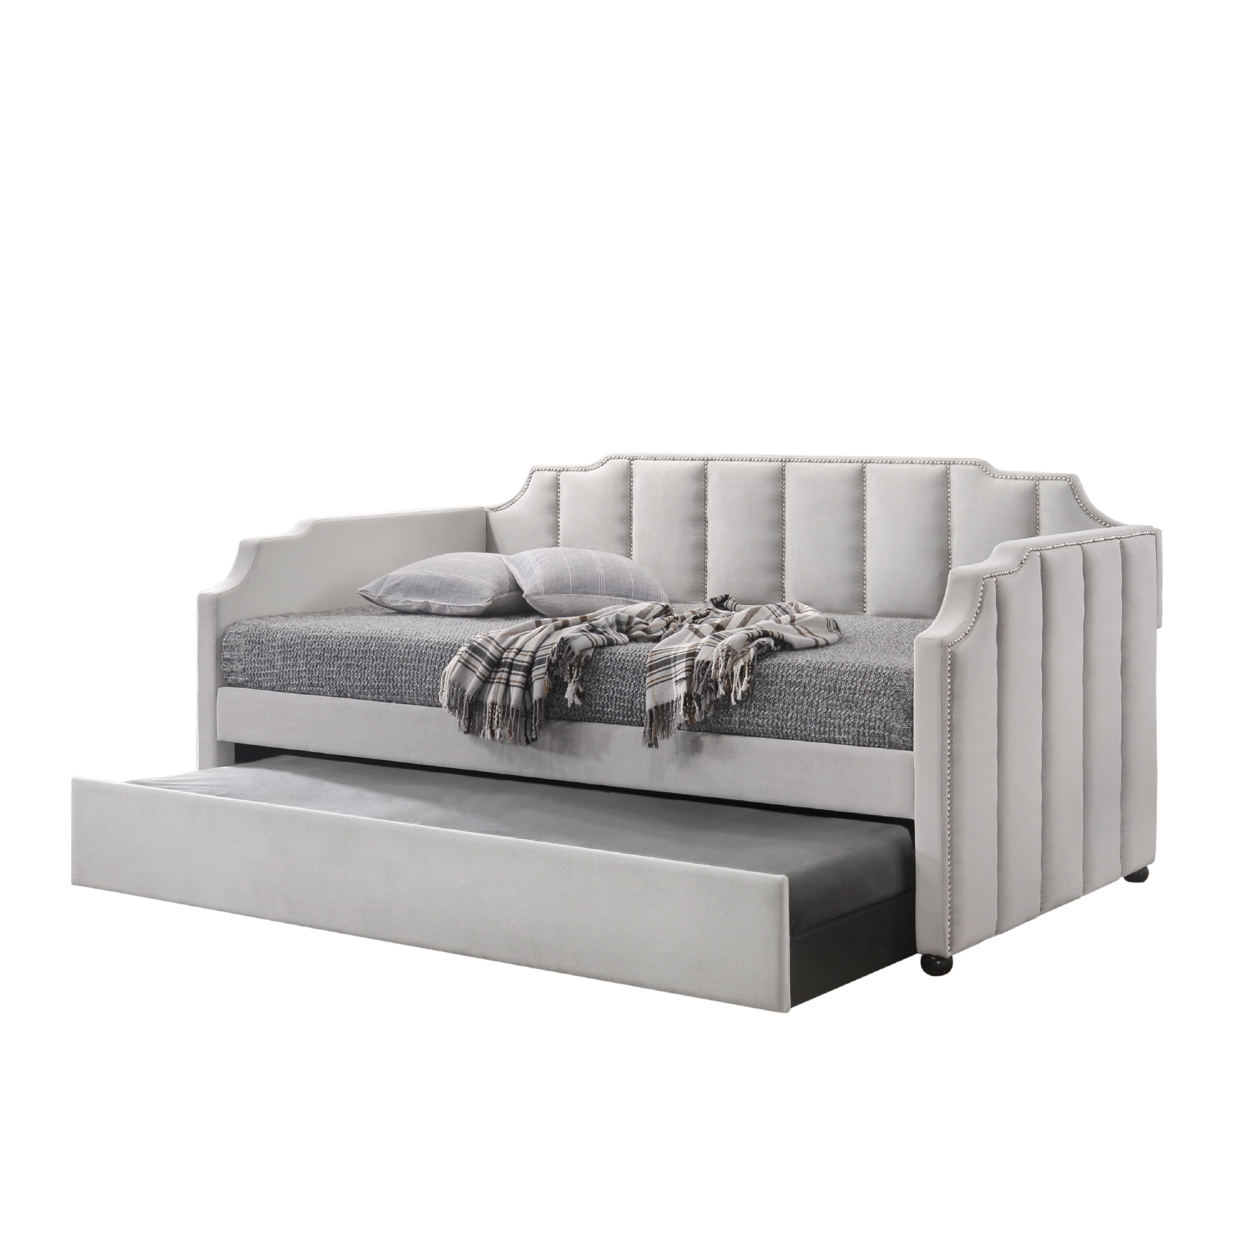 Fabric Twin Size Daybed With Channel Tufting And Nailhead Trim, Gray- Saltoro Sherpi